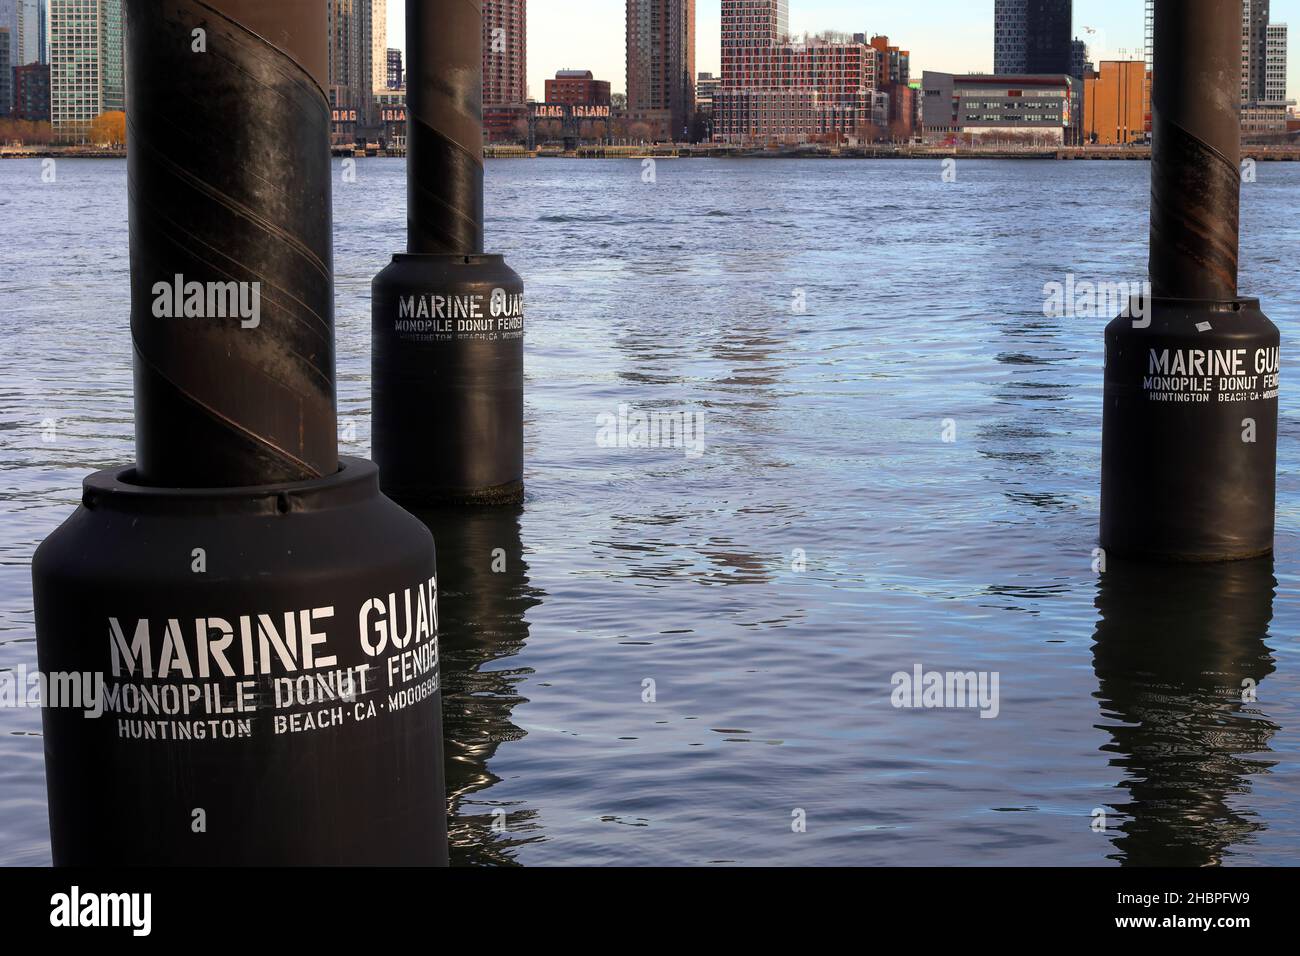 Marine Guard monopile donut fenders floating in the East River, NY. Free floating donut style fenders protect ships from crashing into marine monopile Stock Photo